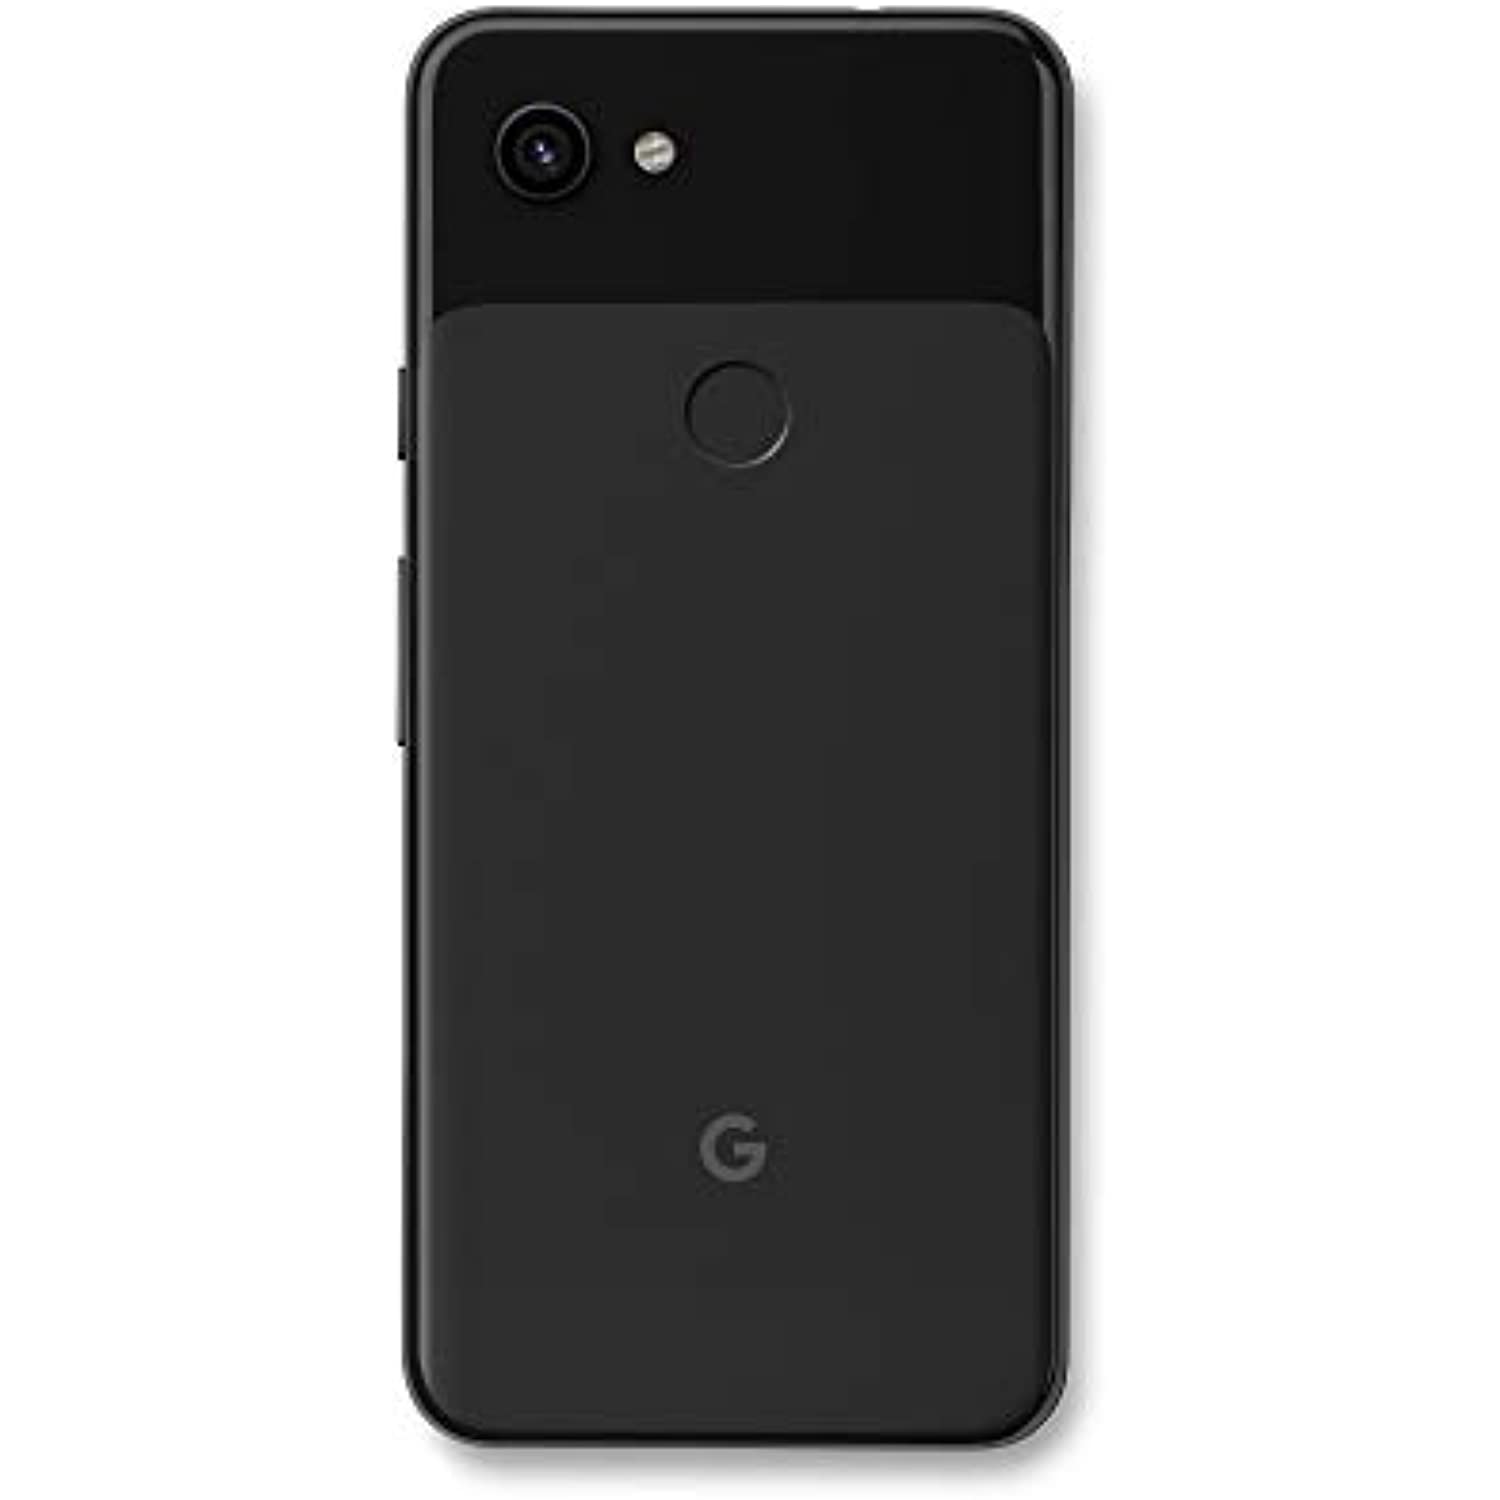 Google - Pixel 3a with 64GB Memory Cell Phone (Unlocked) - Just Black - image 4 of 5